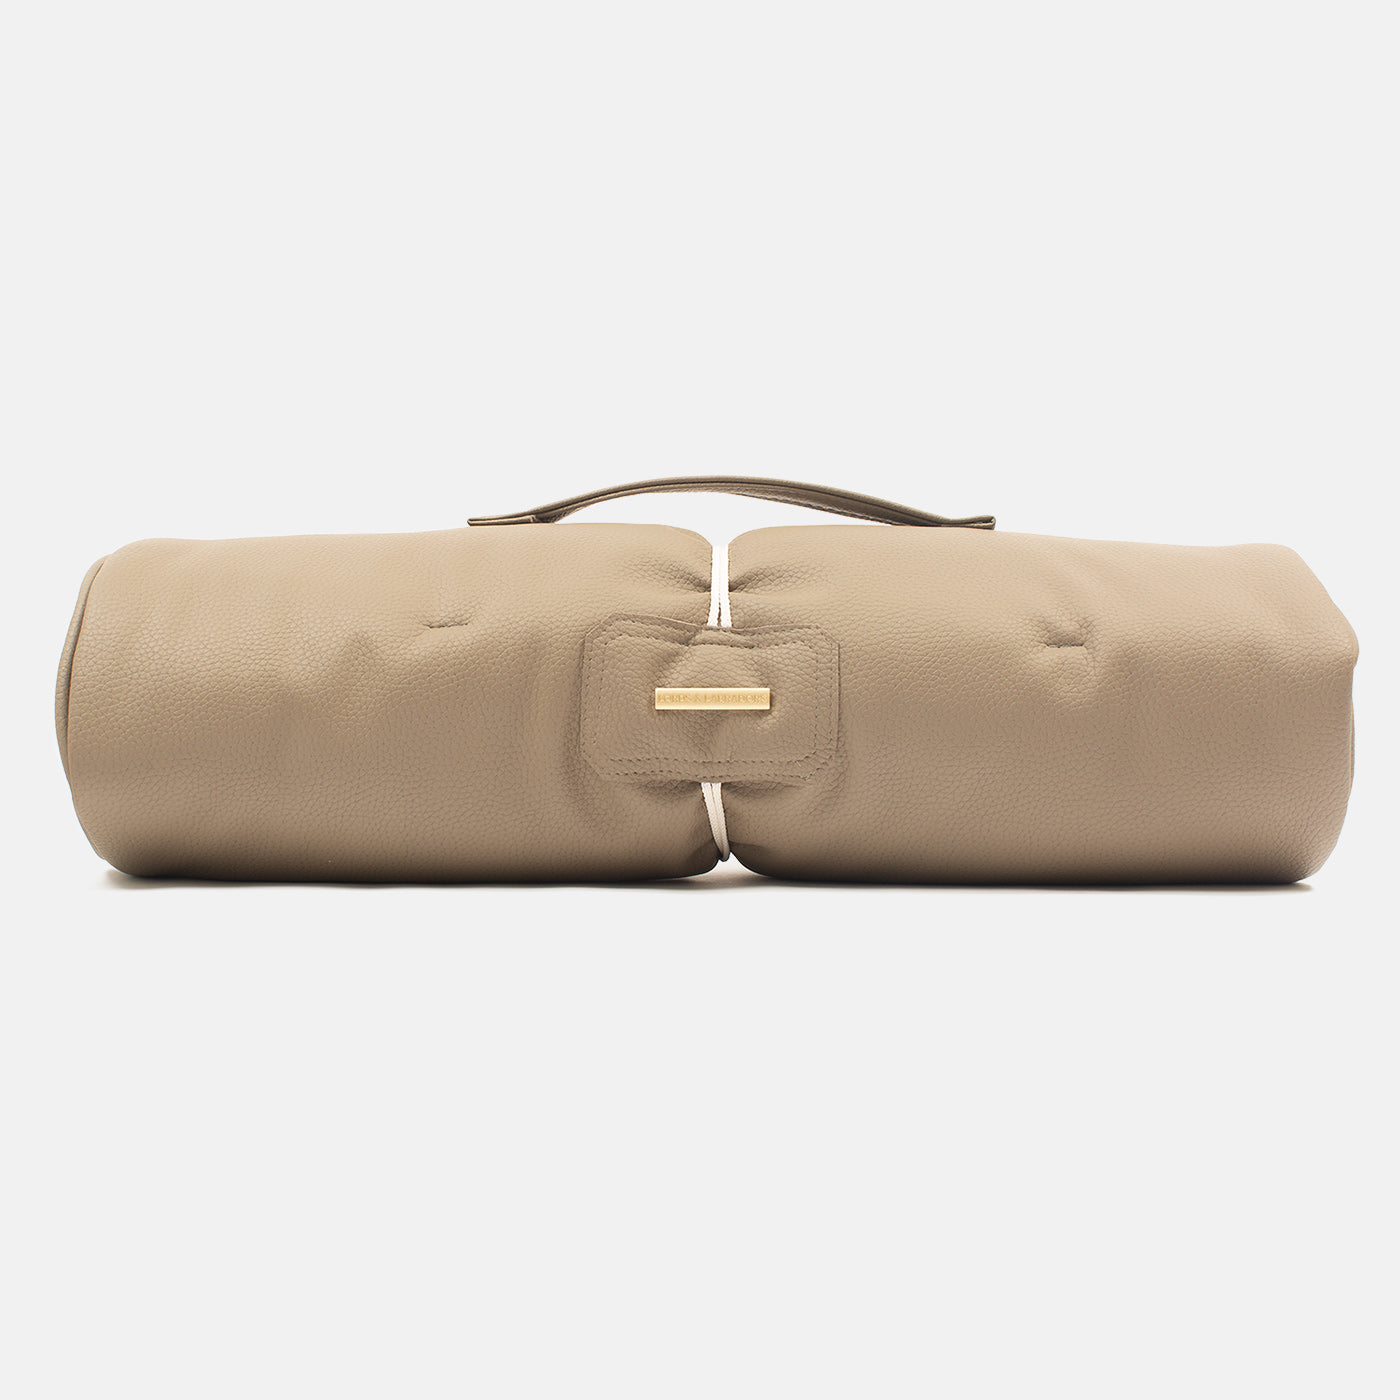 Embark on the perfect pet travel with our luxury Travel Mat in Rhino Camel. Featuring a Carry handle for on the move once Rolled up for easy storage, can be used as a seat cover, boot mat or travel bed! Available now at Lords & Labradors